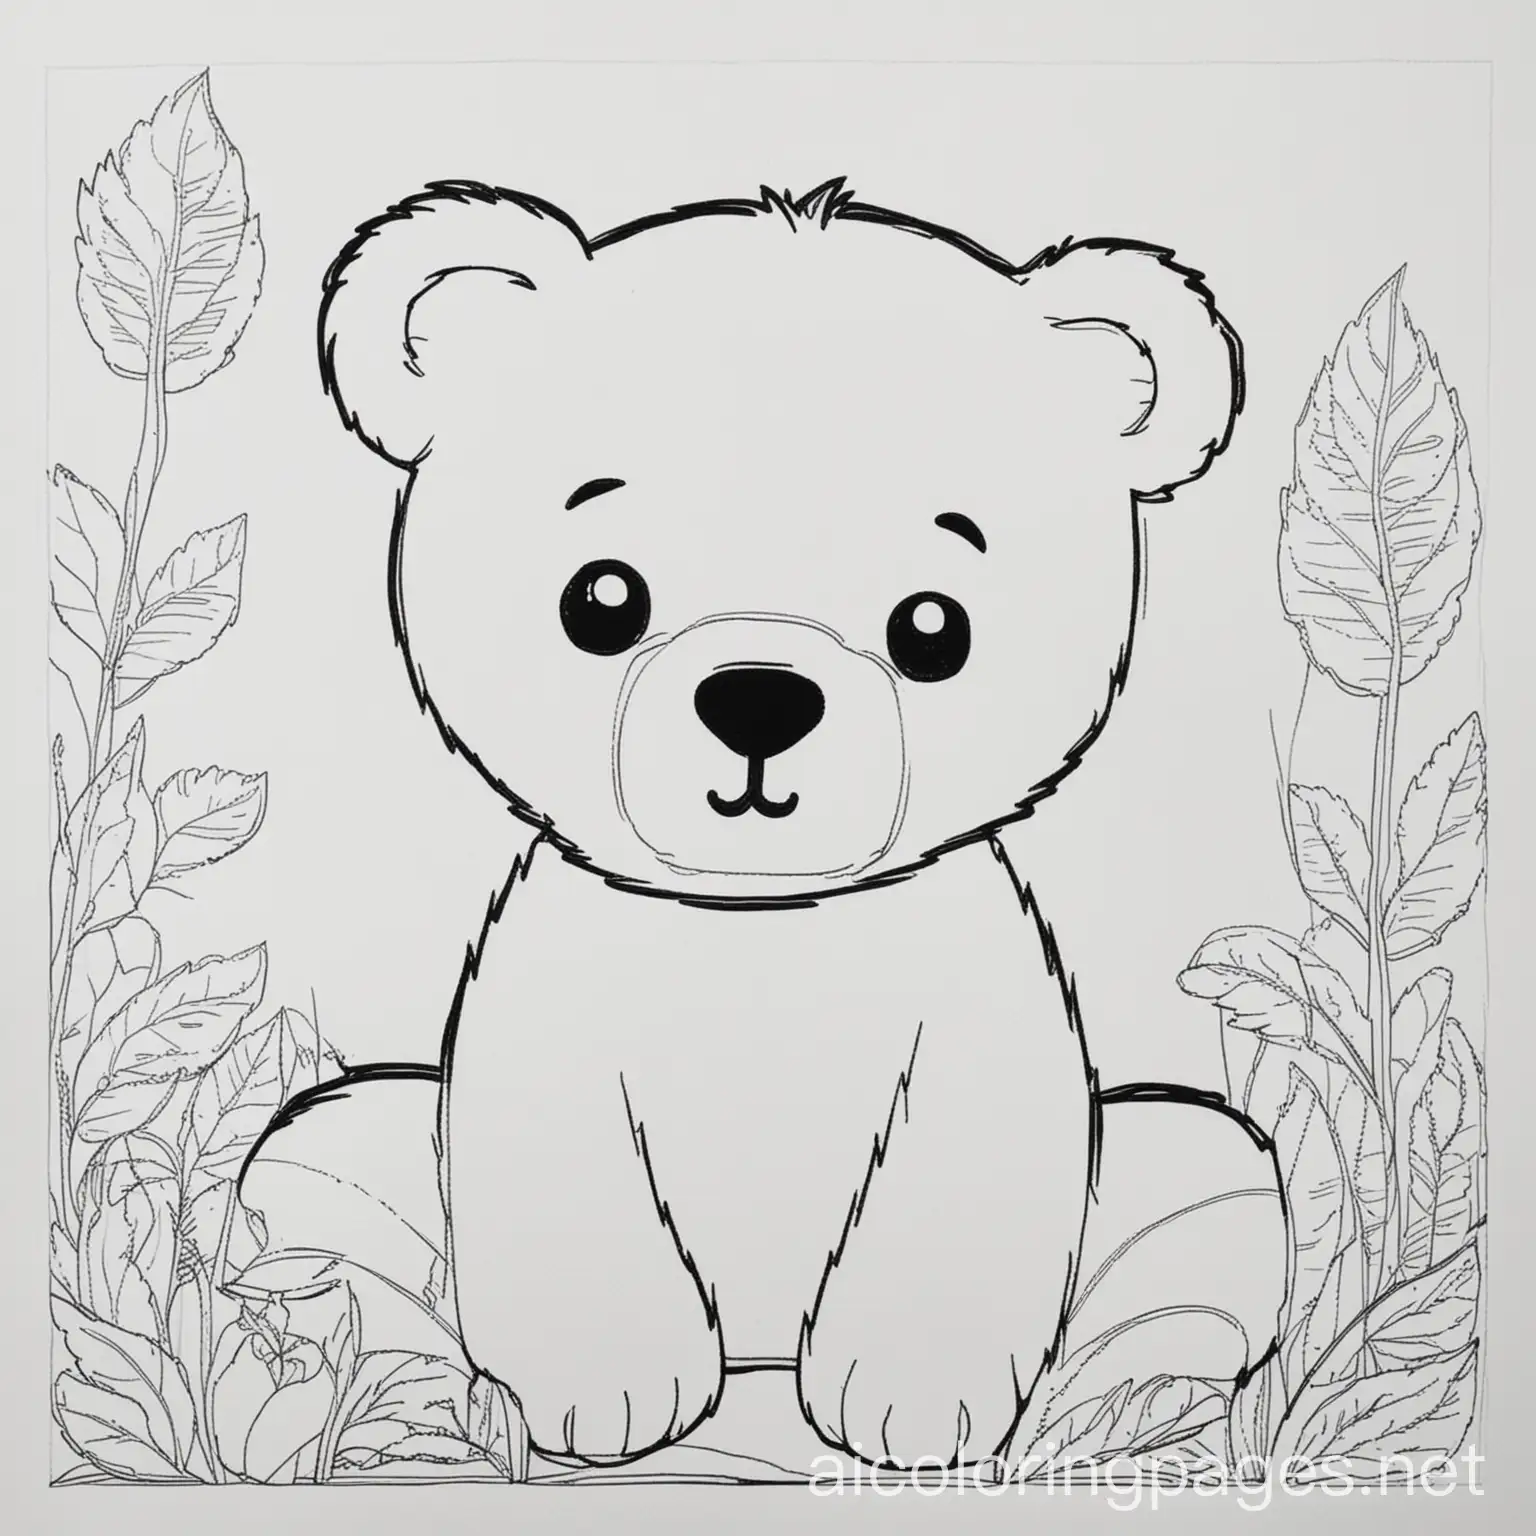 Cute-Bear-Coloring-Page-for-Kids-Black-and-White-Line-Art-on-White-Background